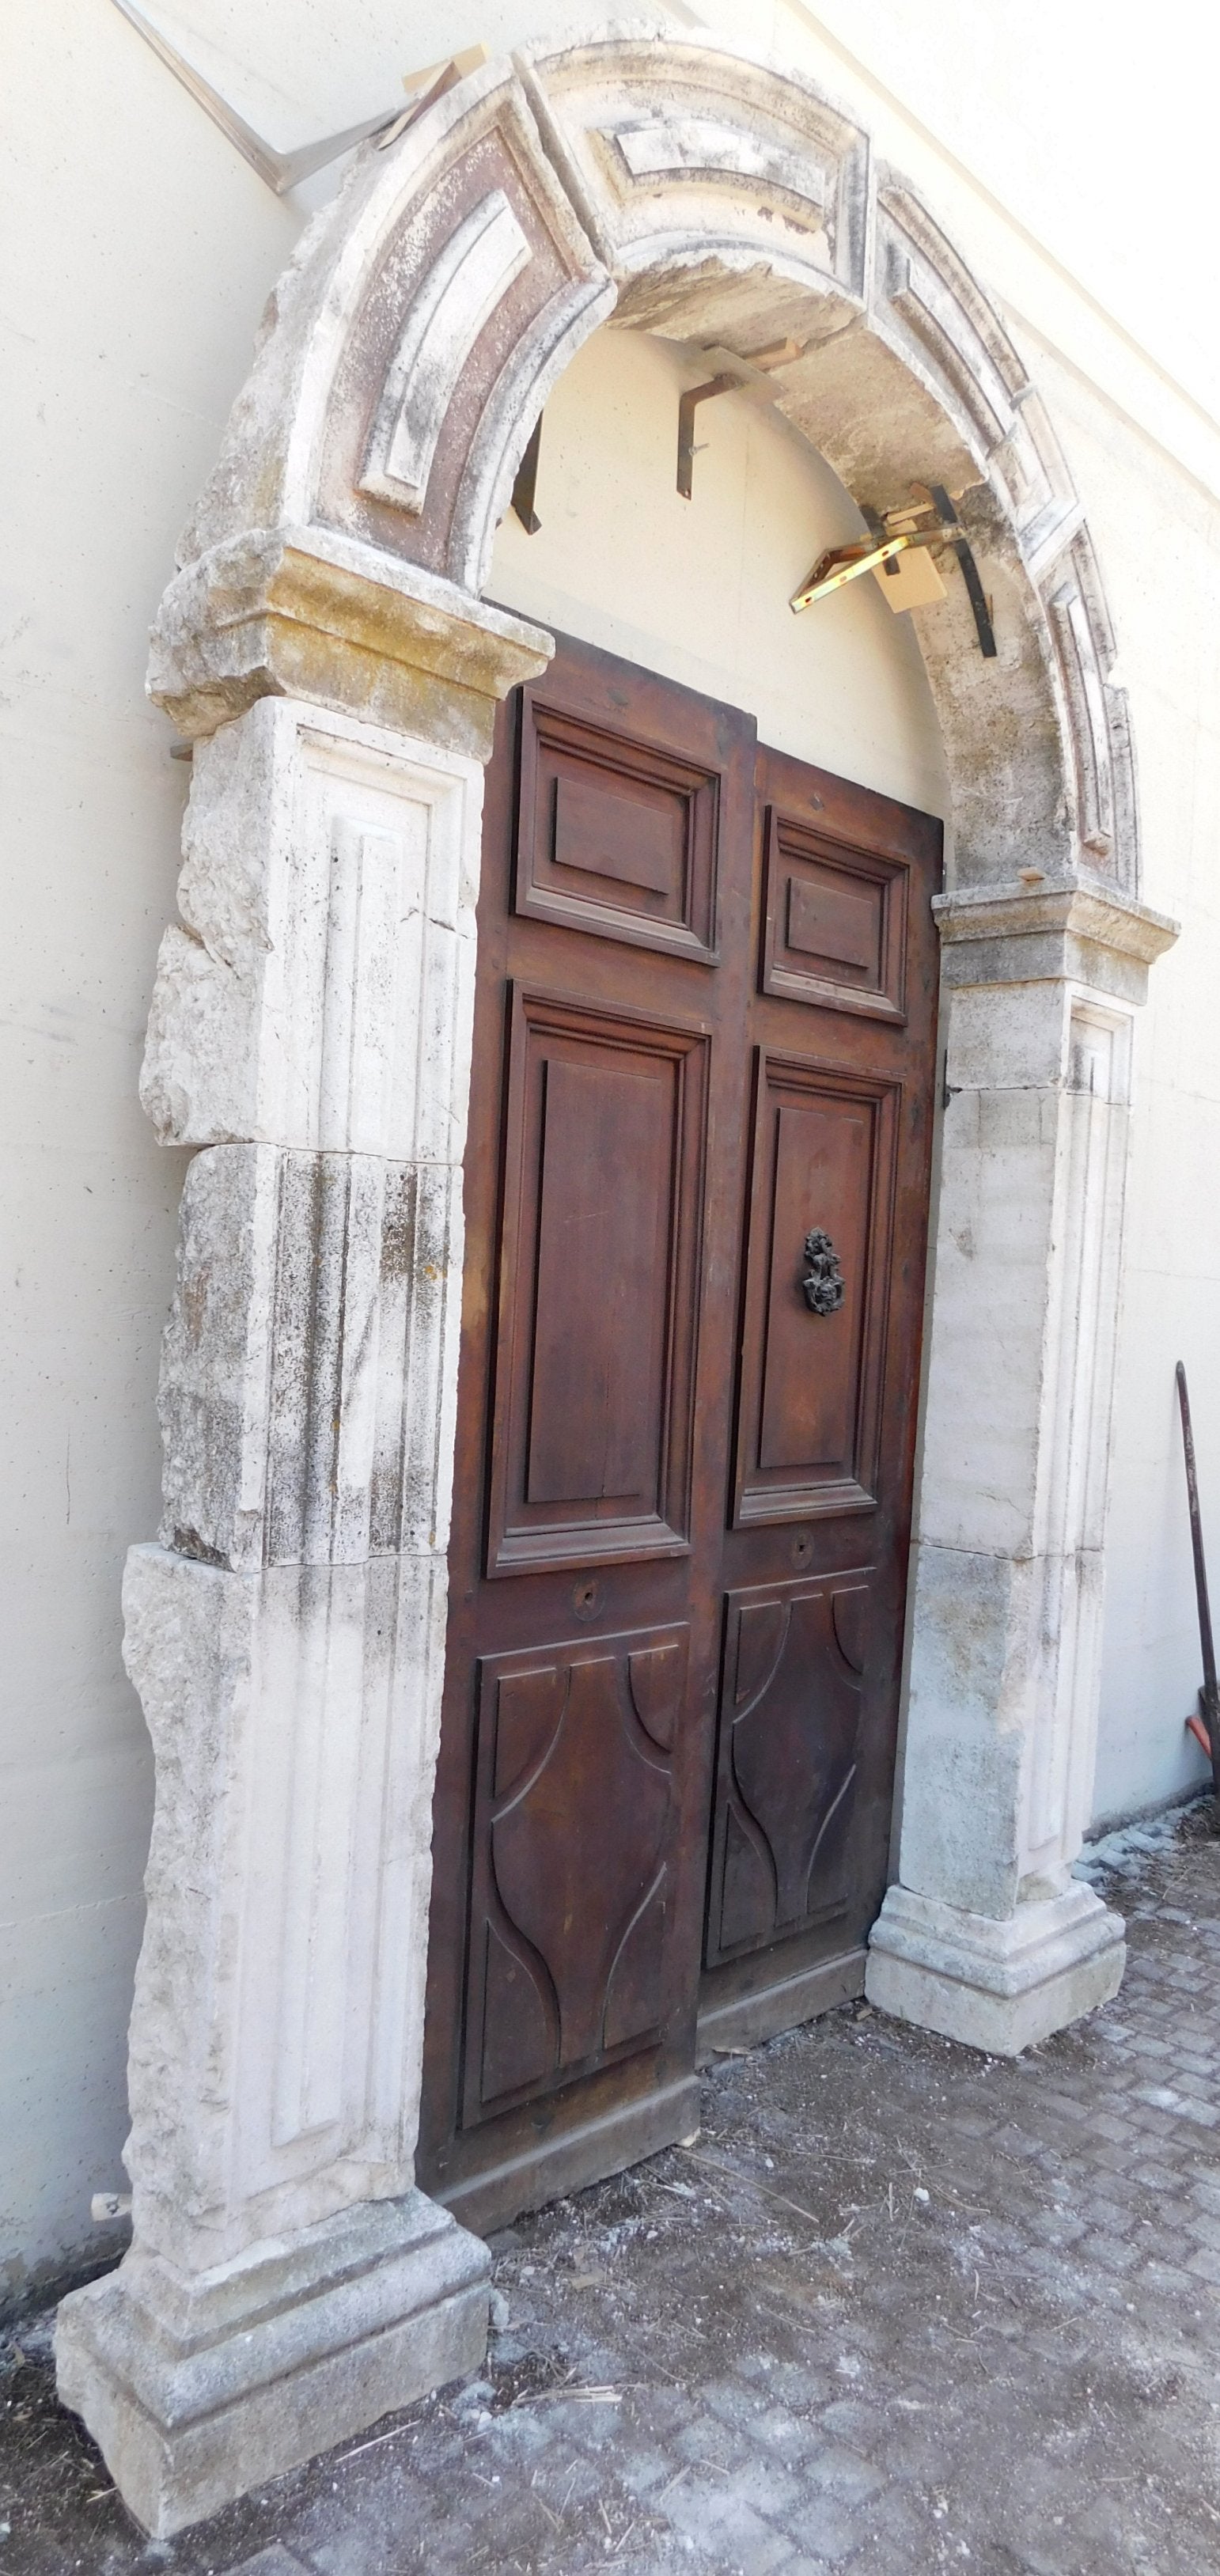 Ancient stone portal, frame for entrance door, very solid and powerful, hand-sculpted in the full 17th century, composed of hard stone parts to be assembled in a ribbed frame, handcrafted in Italy.
Ideal for expanding and embellishing entrances to